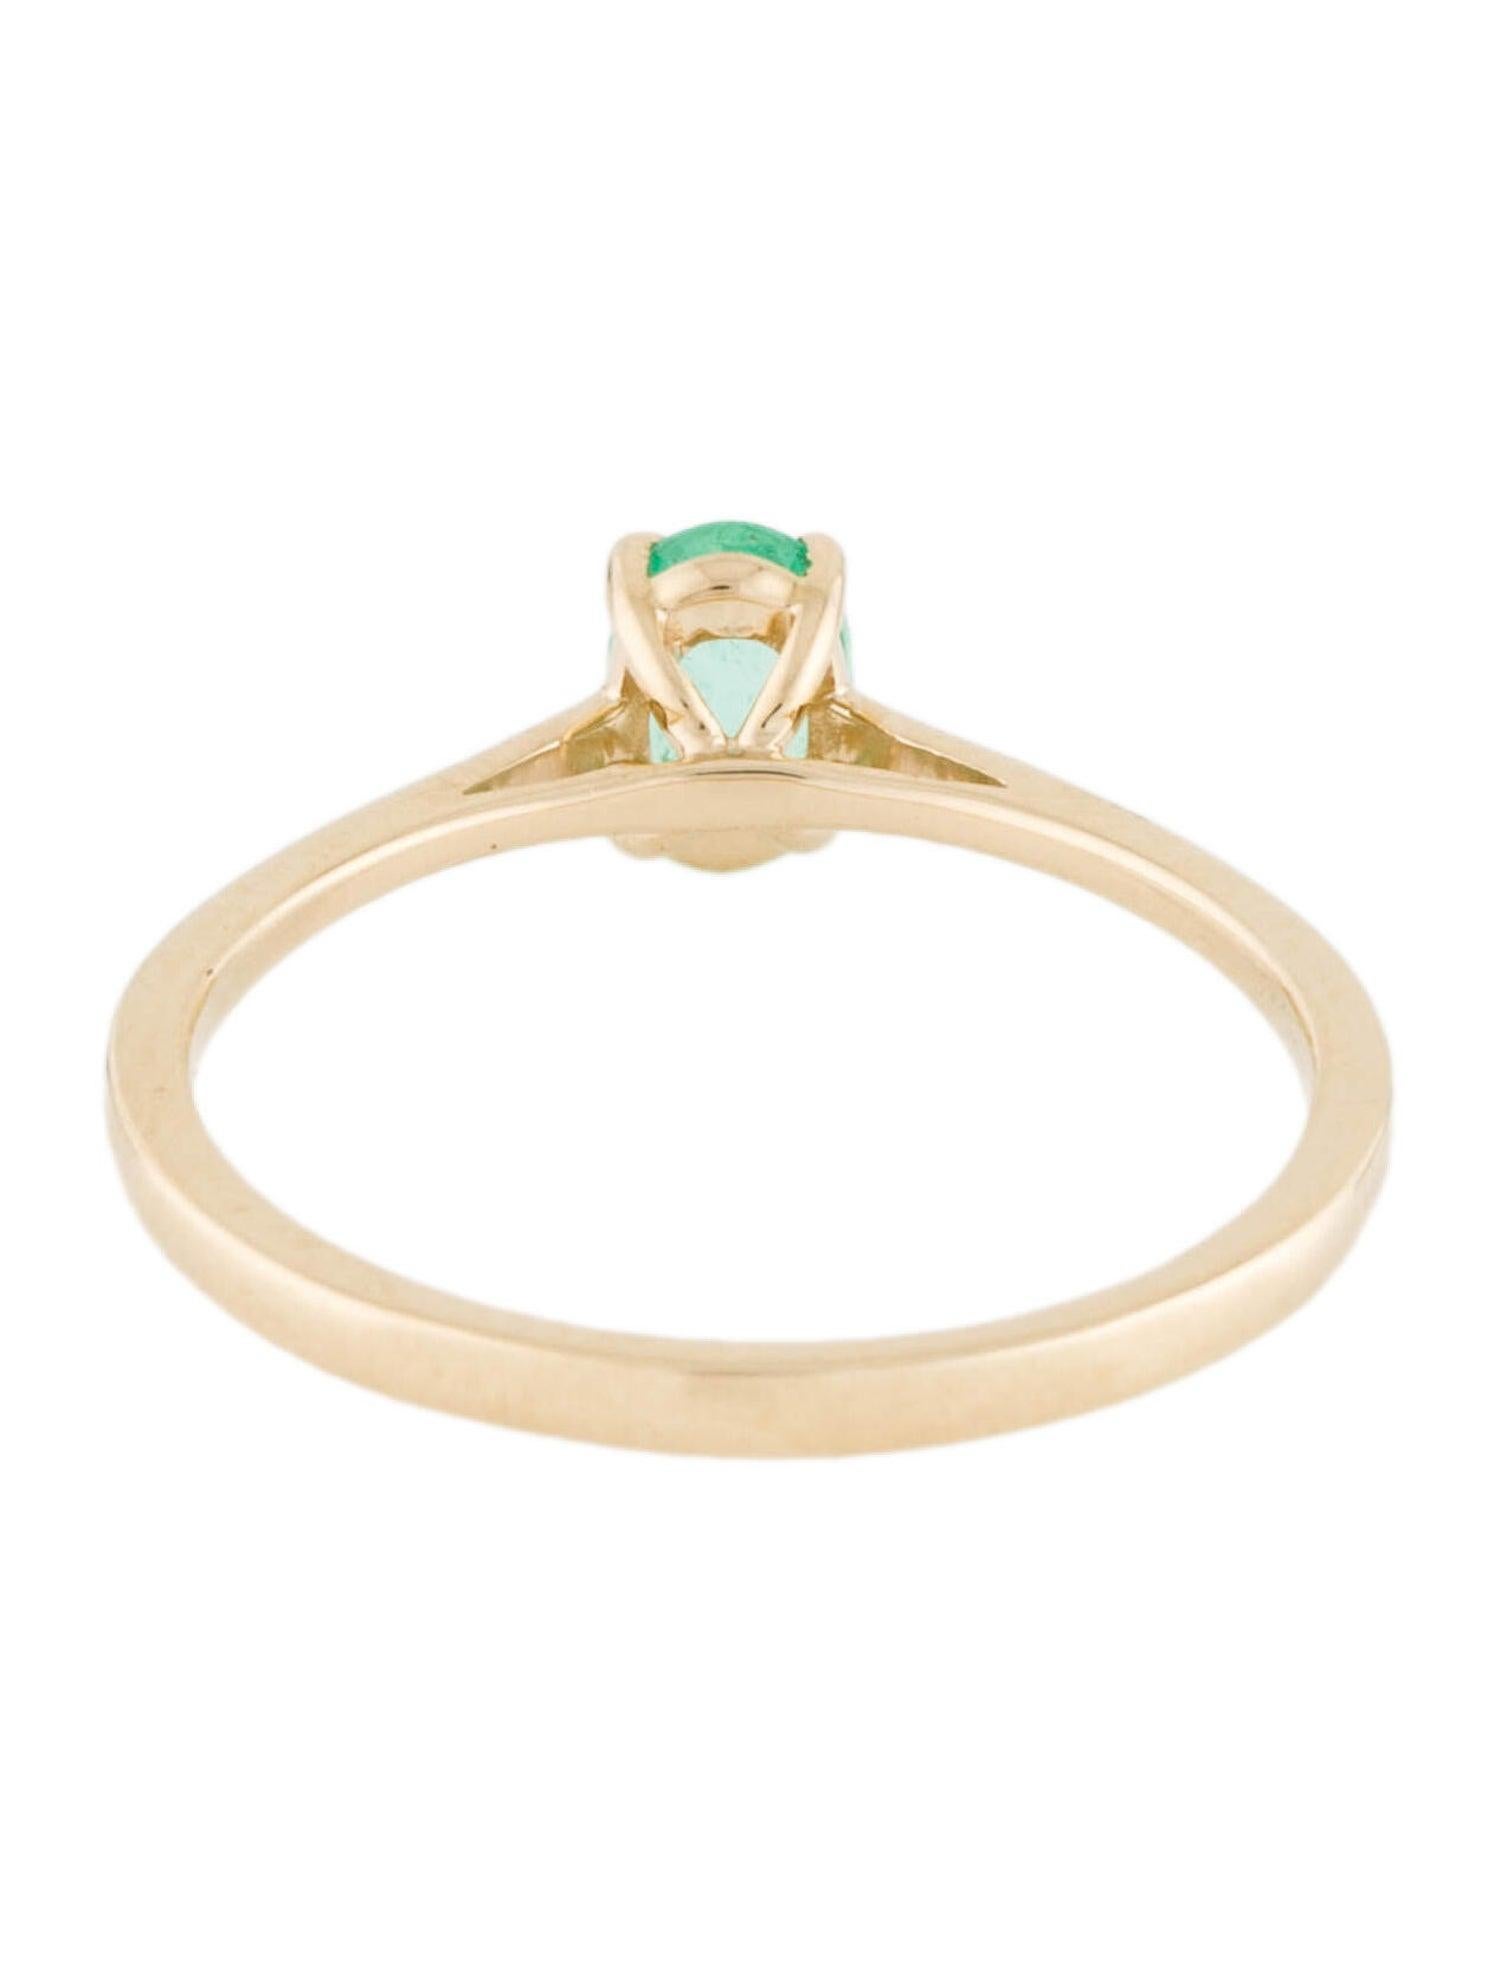 Brilliant Cut Luxurious 14K Emerald Cocktail Ring, Size 6.75 - Timeless Statement Jewelry For Sale